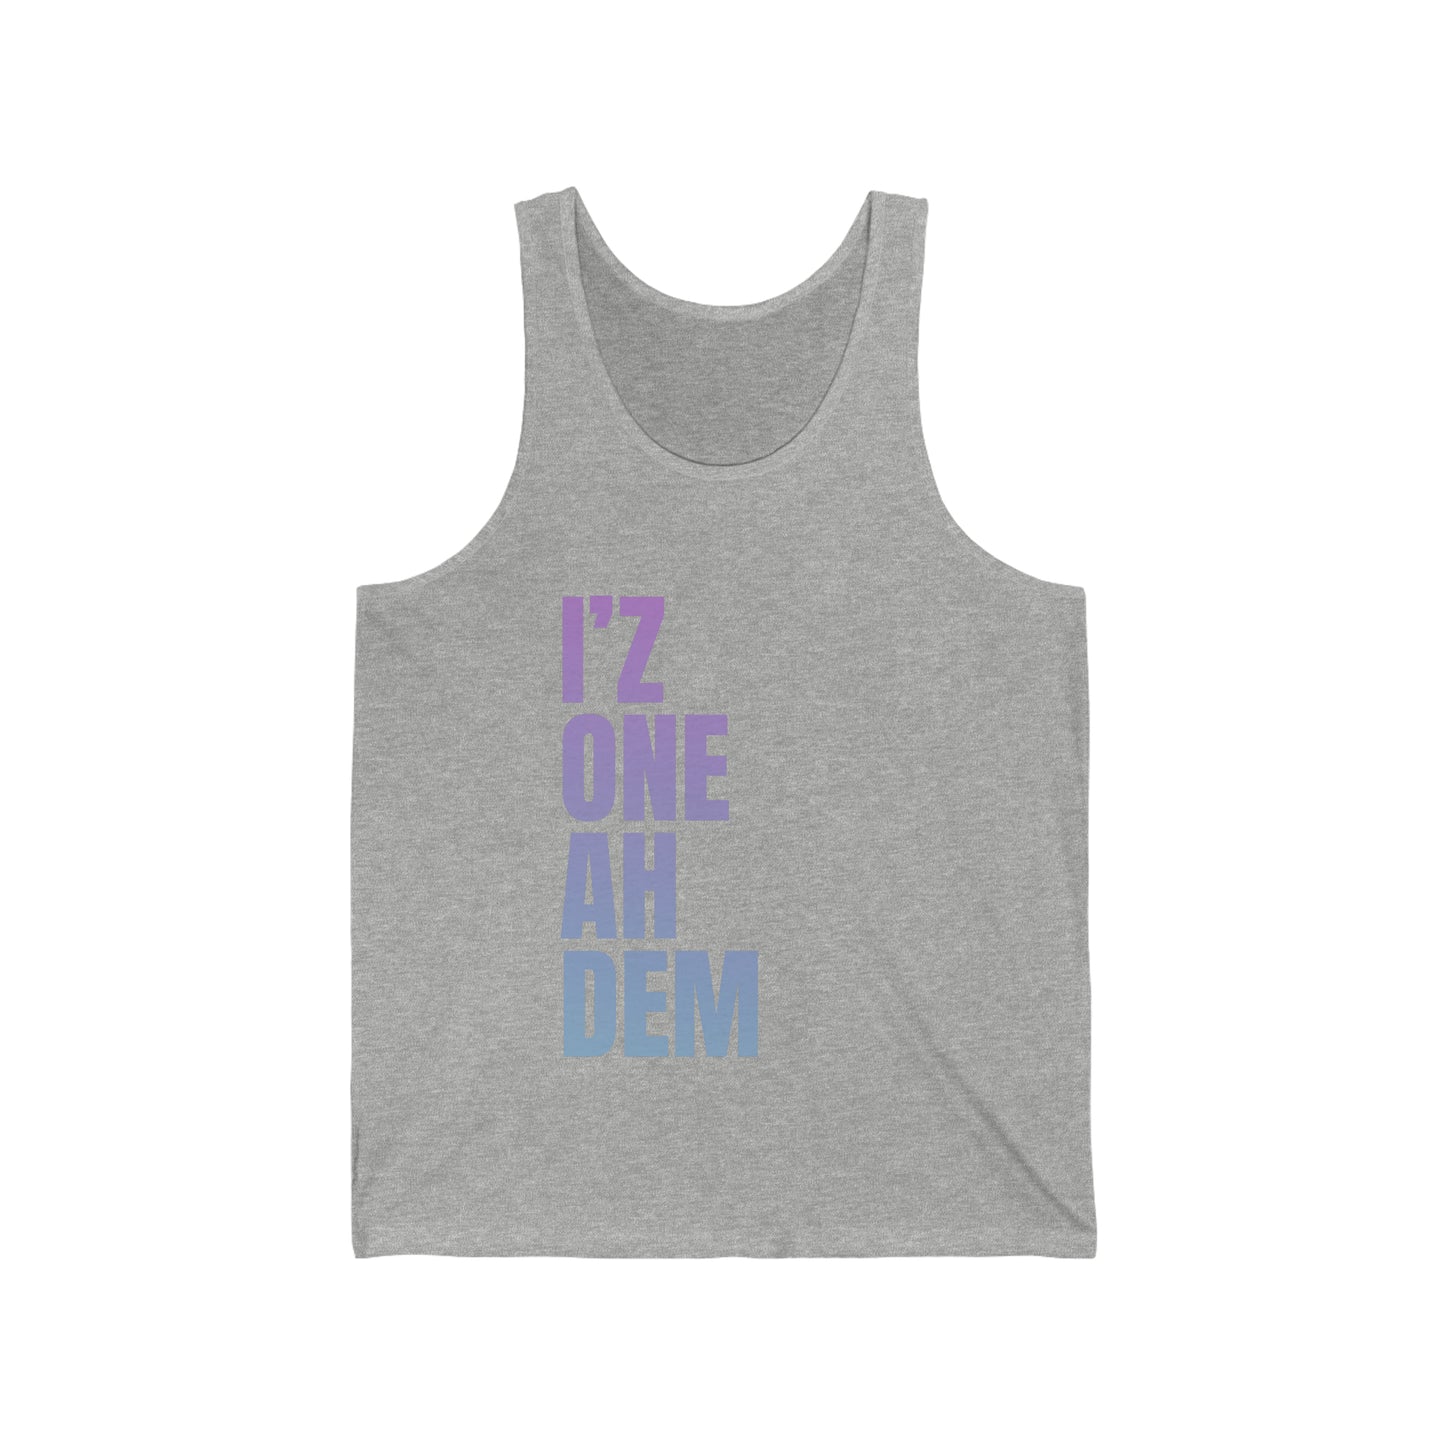 I'z One Ah Dem - Shal Unisex Jersey Tank ( pink to blue gradient)